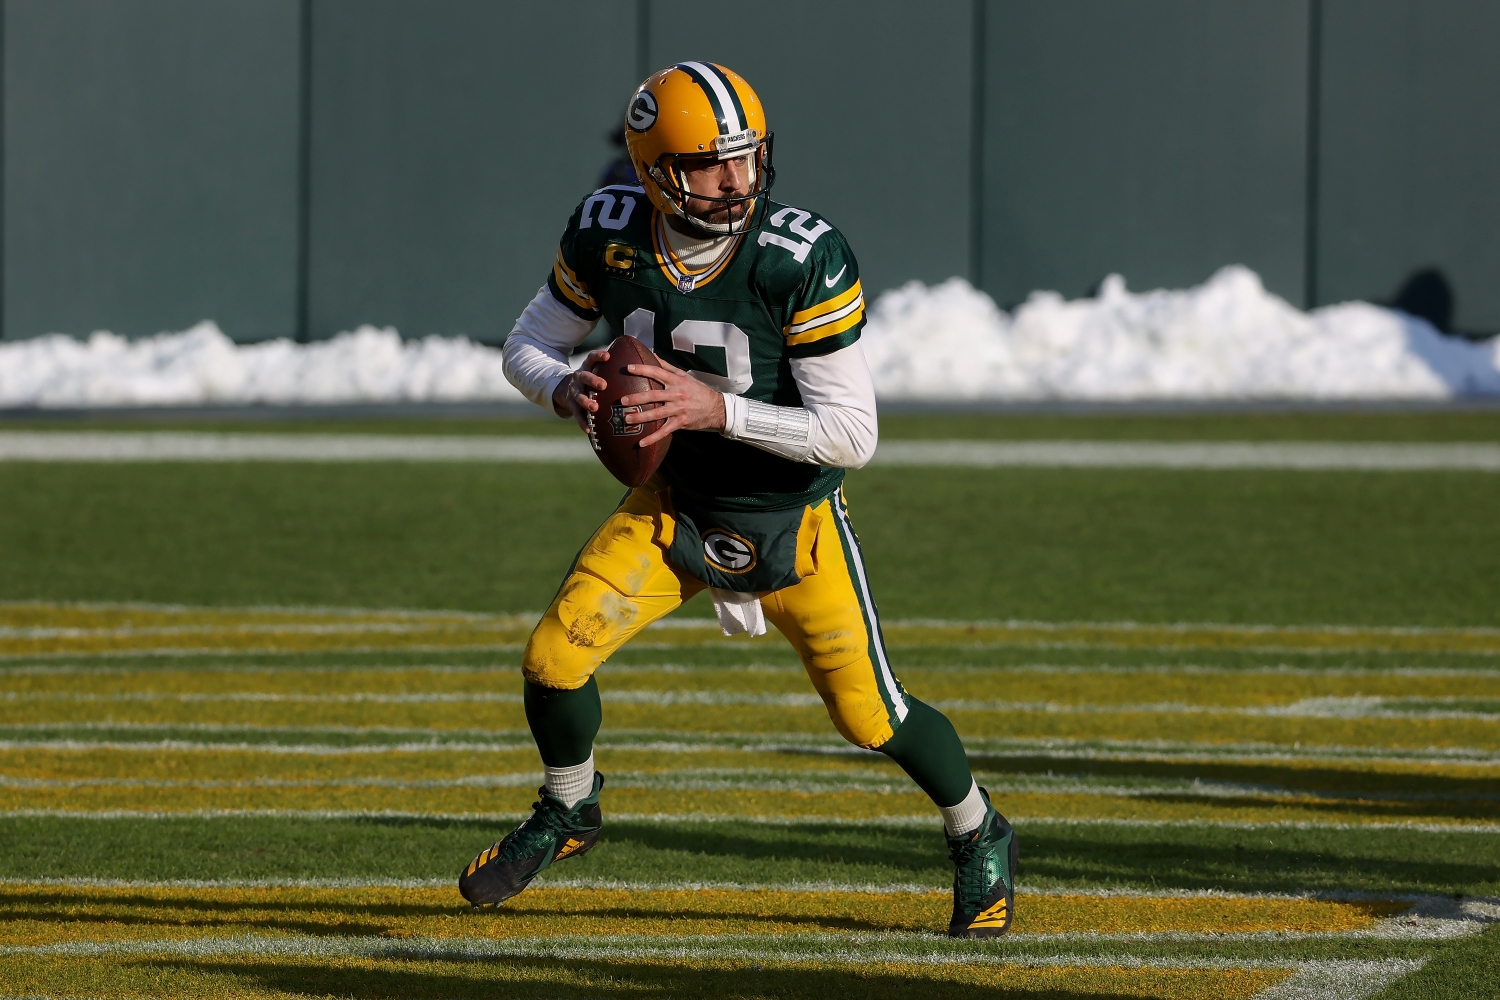 Green Bay Packers quarterback Aaron Rodgers drops back to pass during the NFC Championship.